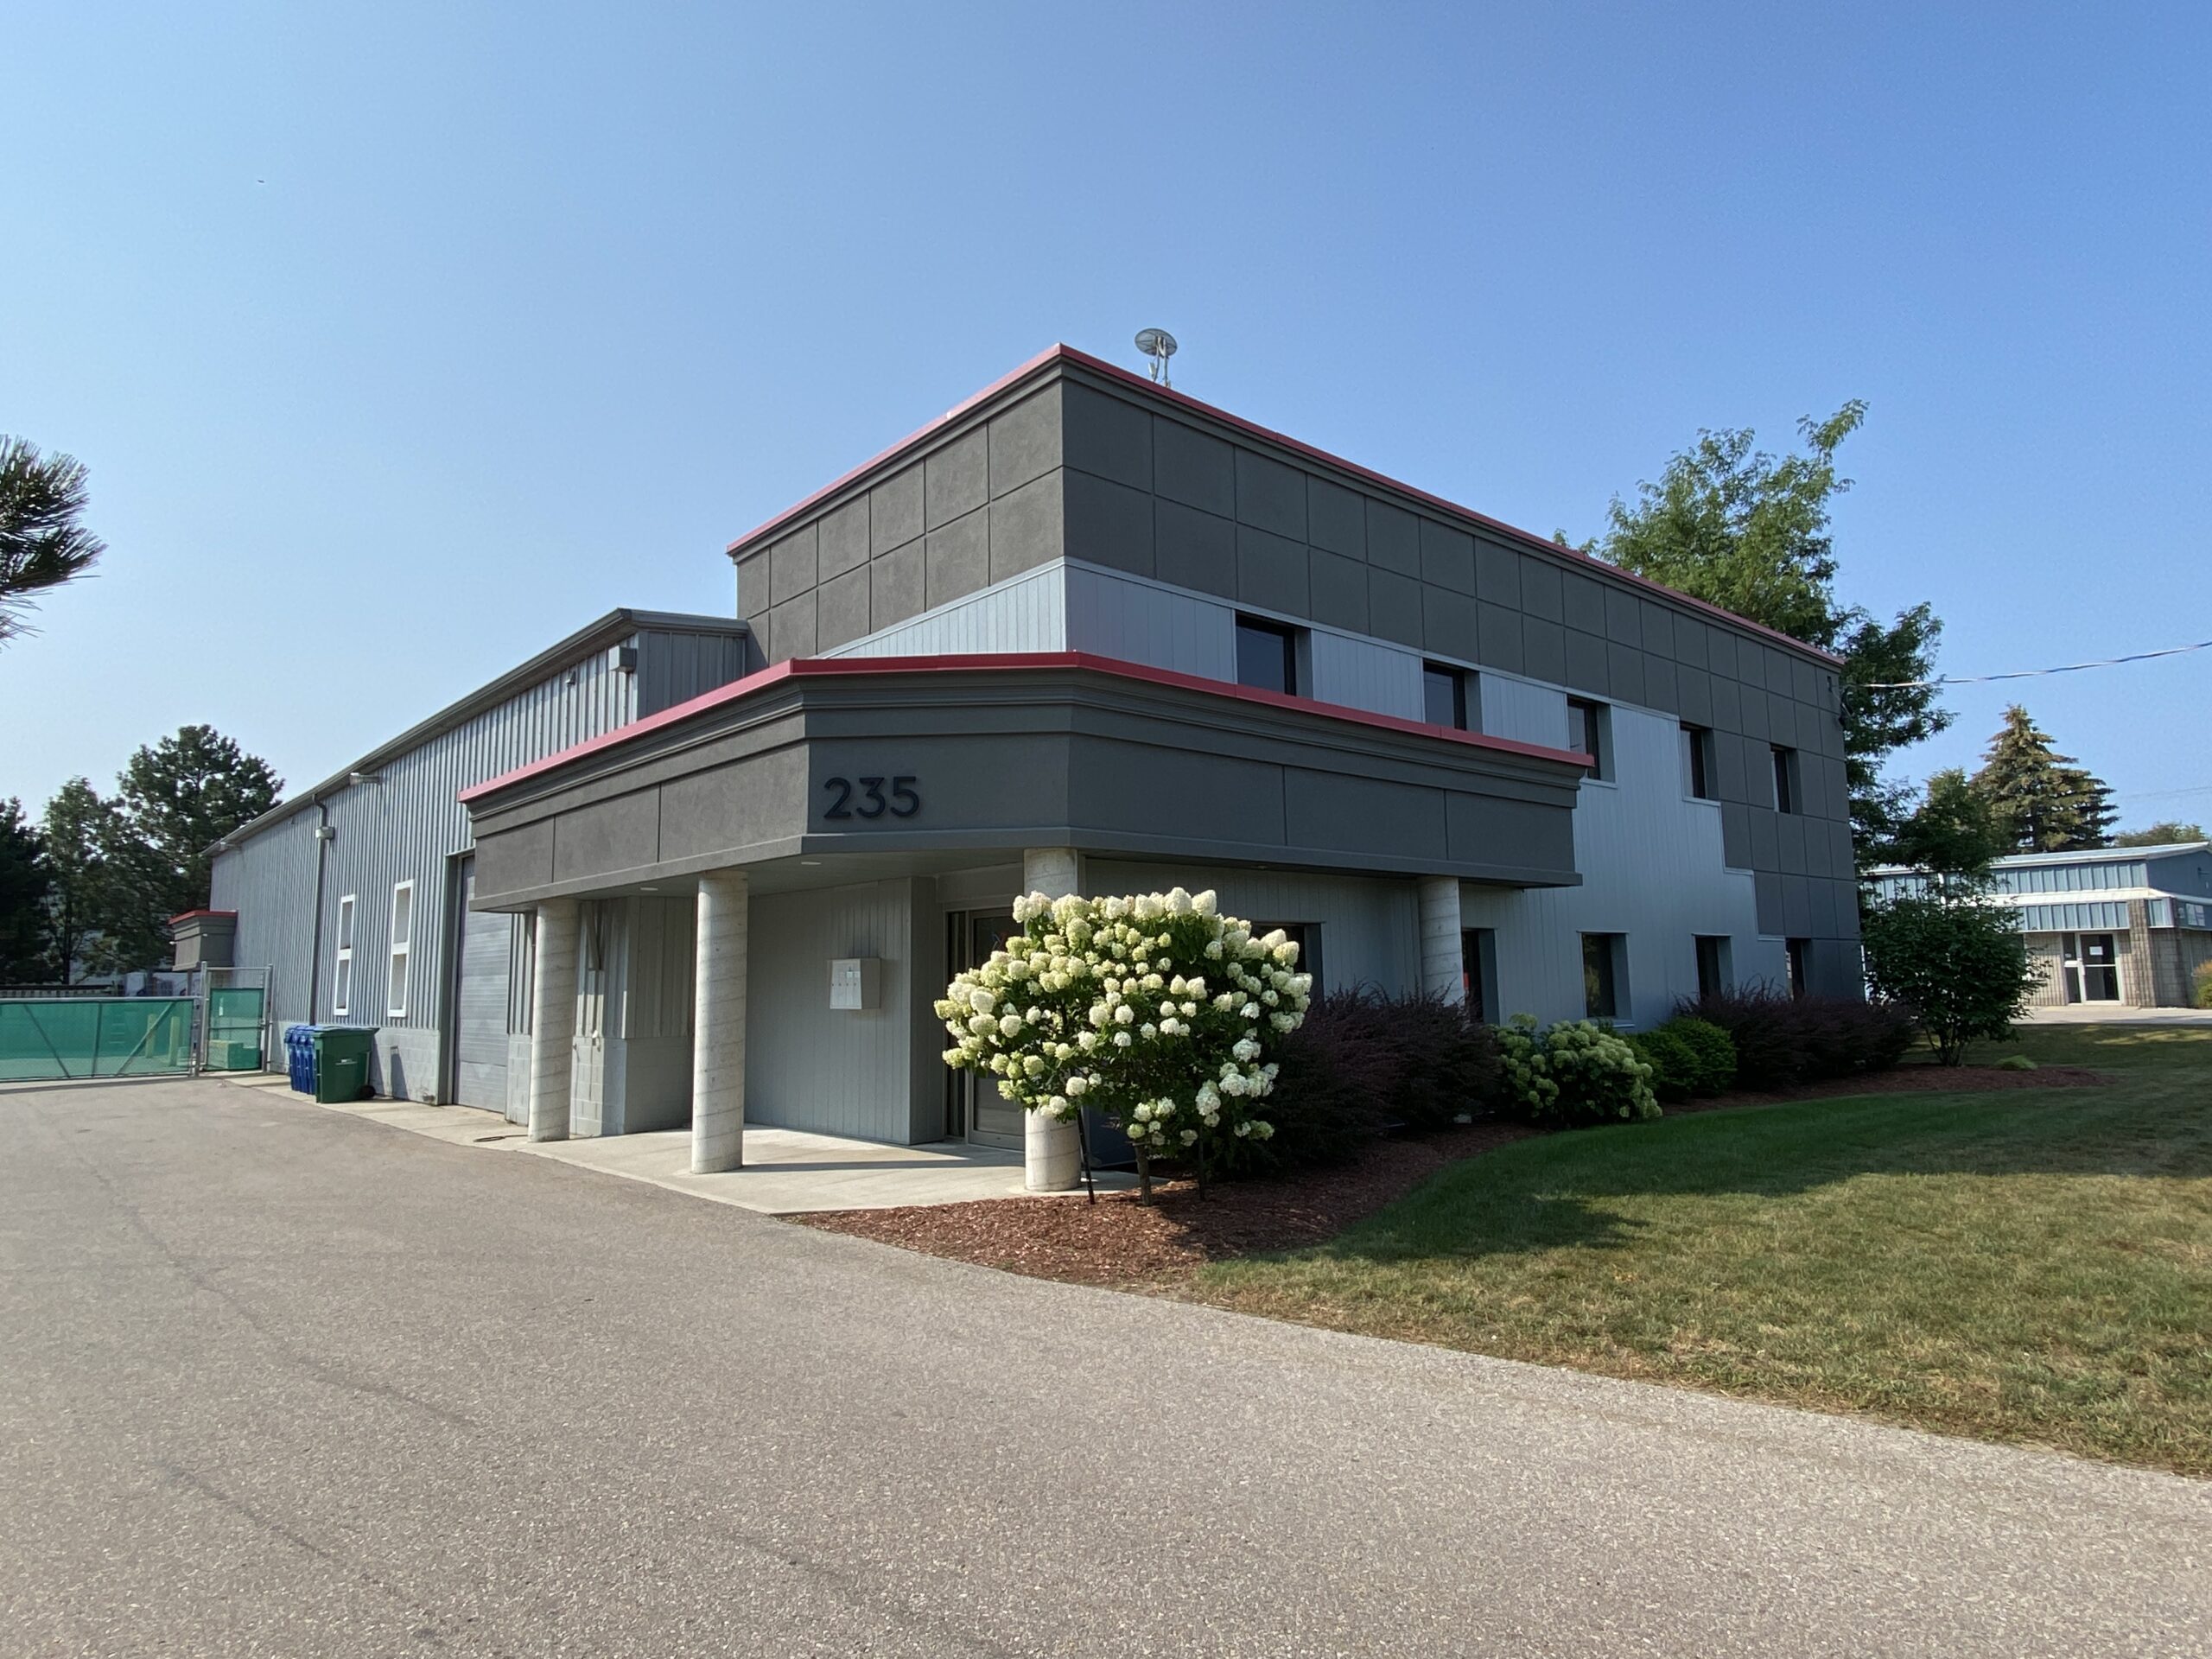 235 Bathurst Drive, Waterloo | Office Space for Lease